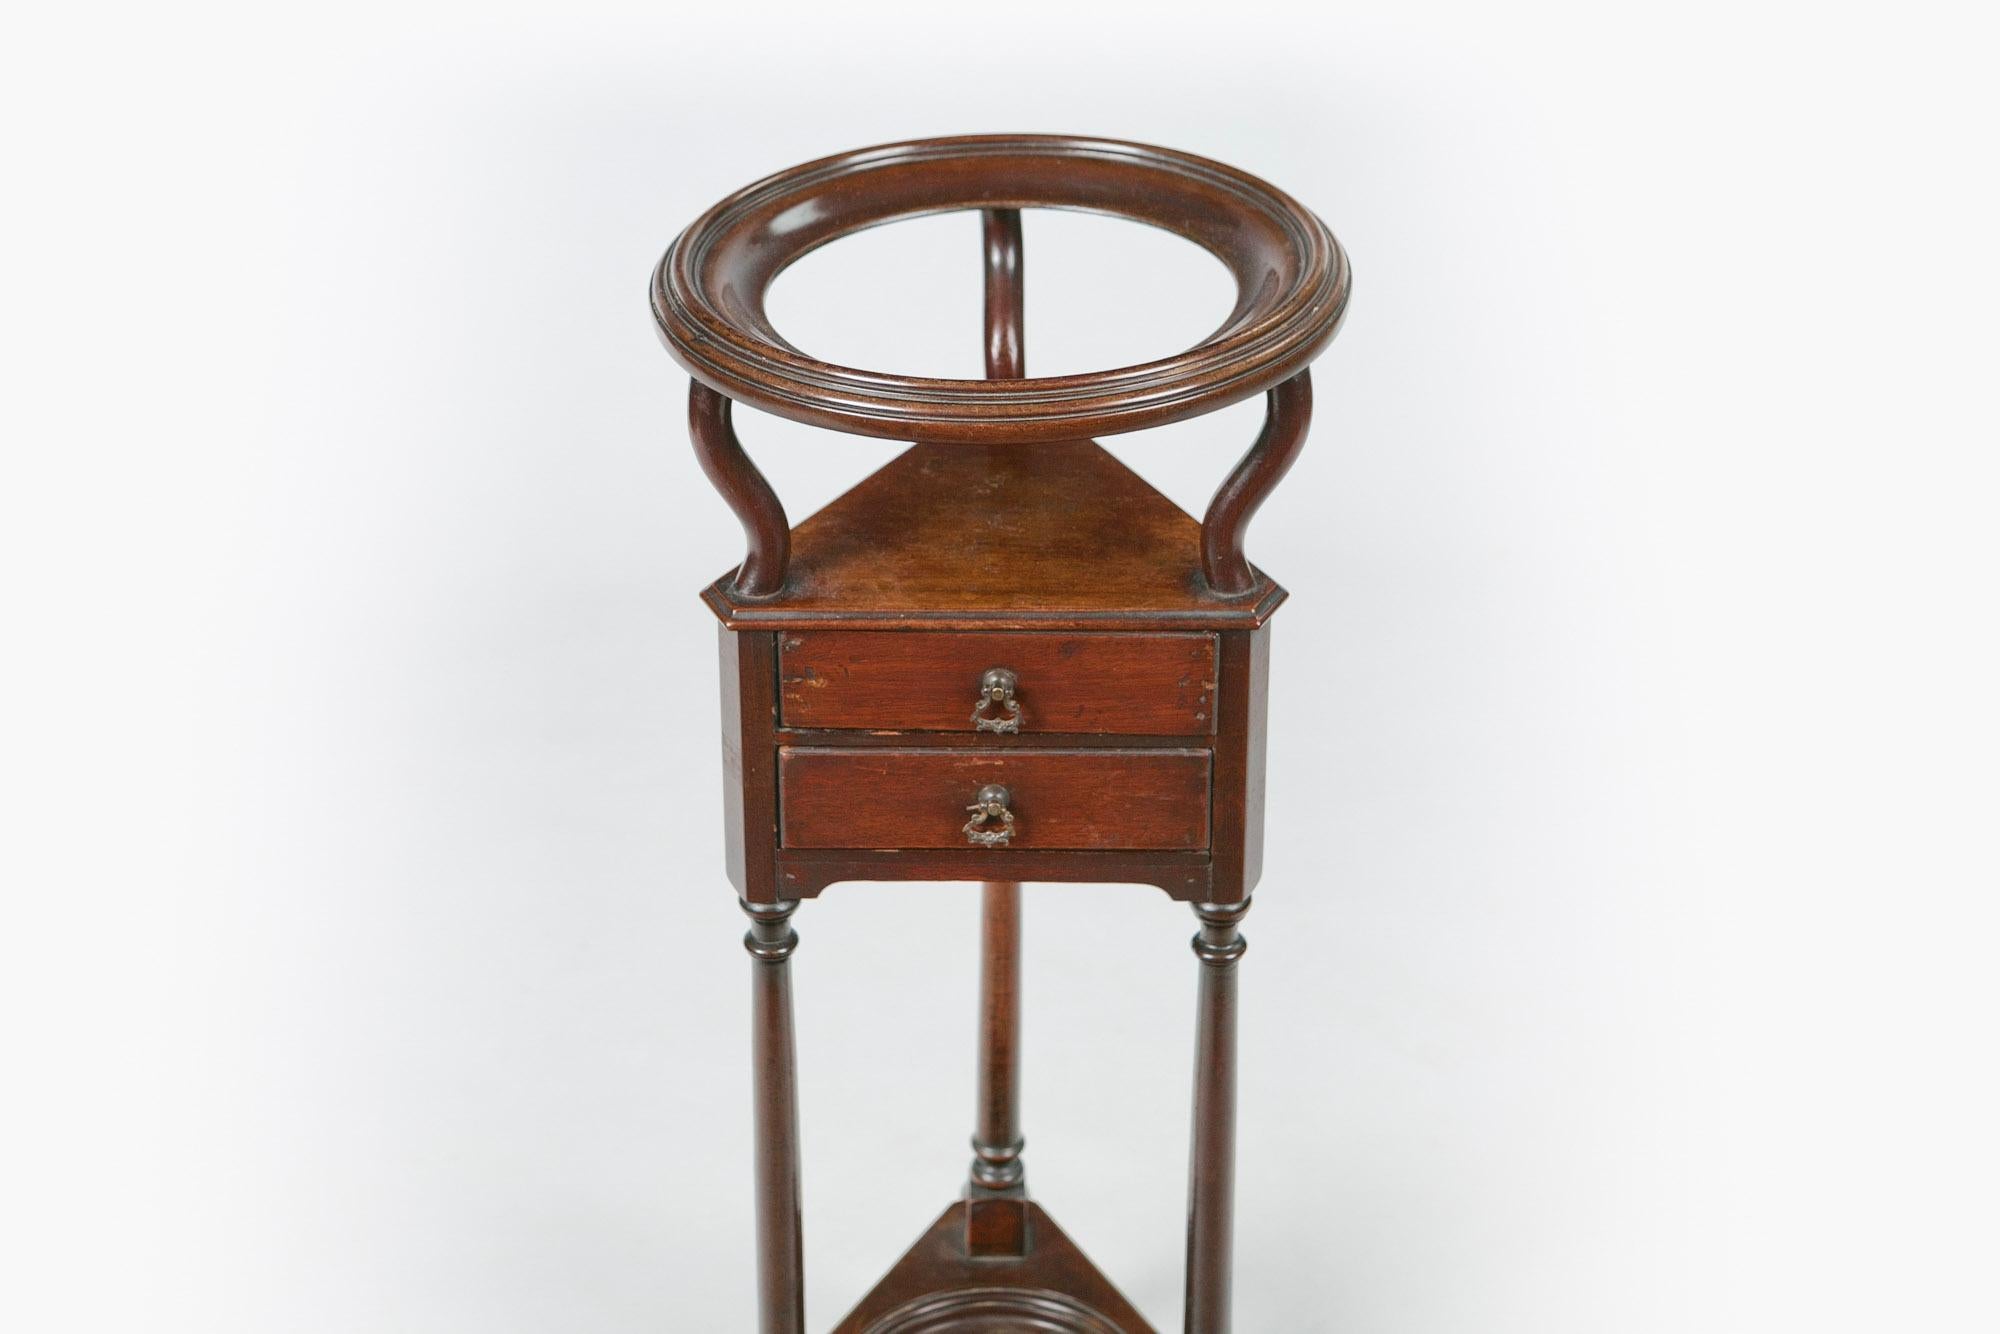 18th century George III mahogany wash or wig stand, the moulded top of circular form with porcelain bowl raised over three curved supports above moulded shelf of triangular form with two drawers with ornate pulls supported on three turned columns